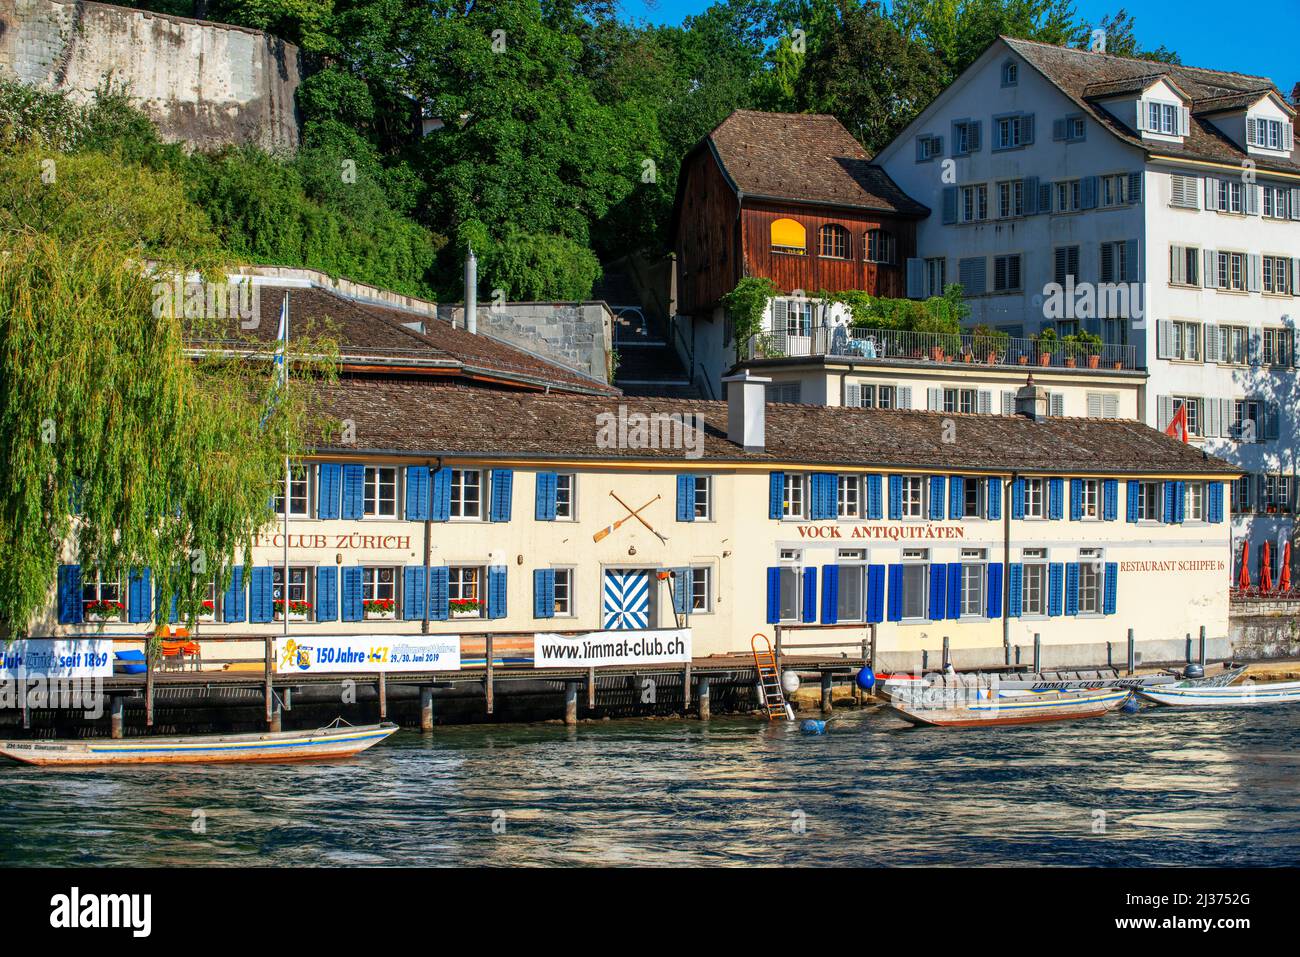 The Limmat Club, a traditional boating club in the historic district of Zurich, Canton of Zurich, Switzerland, Europe Stock Photo